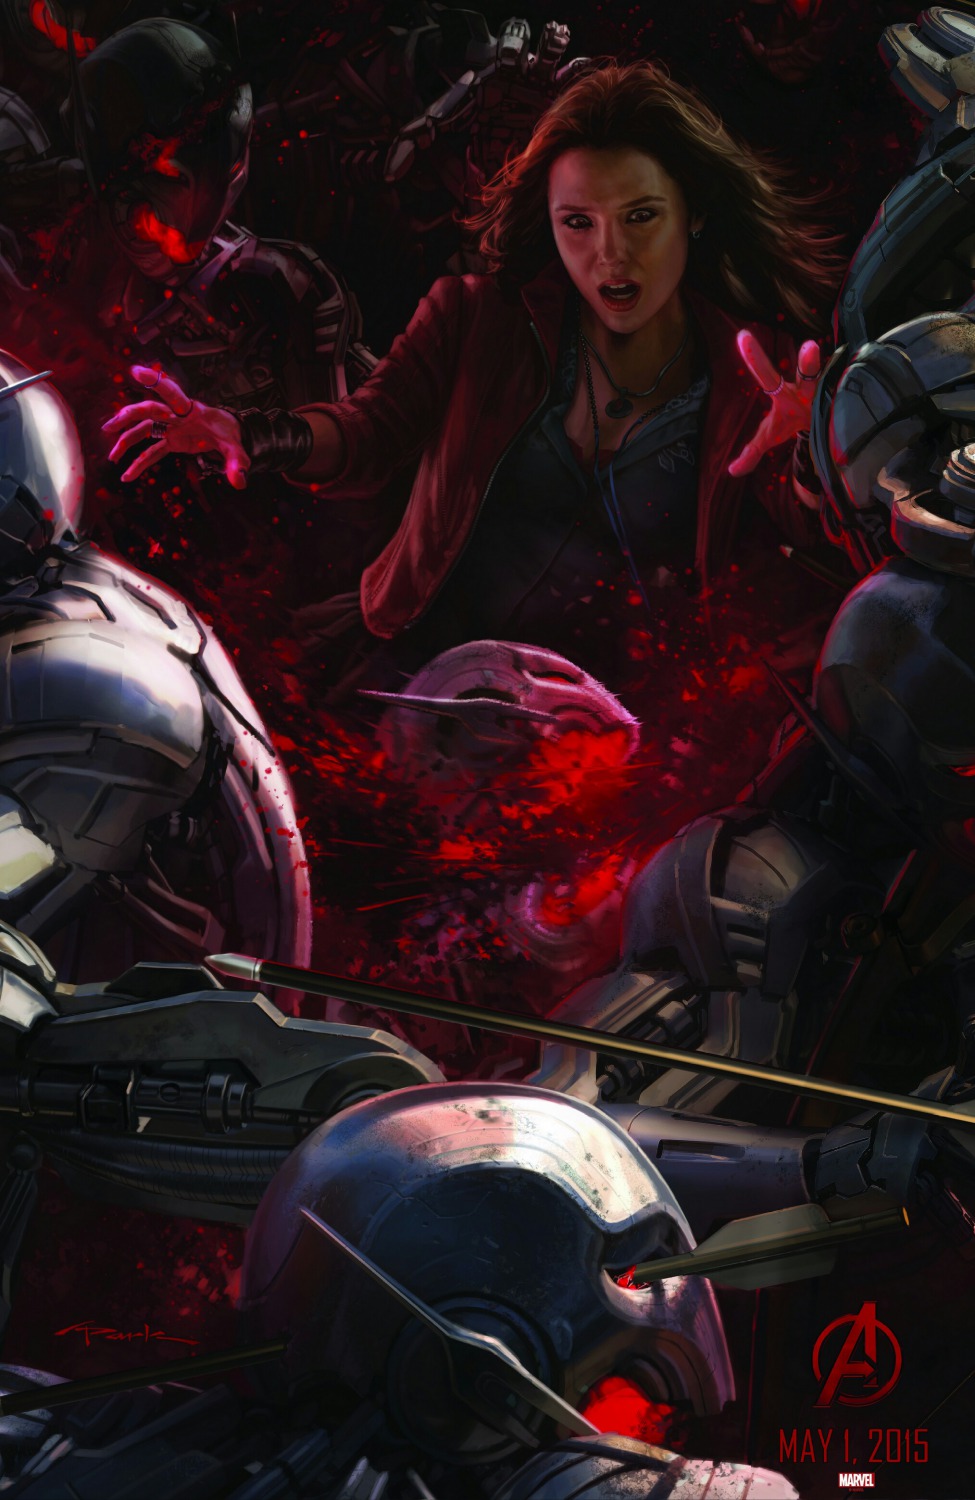 Extra Large Movie Poster Image for Avengers: Age of Ultron (#8 of 36)